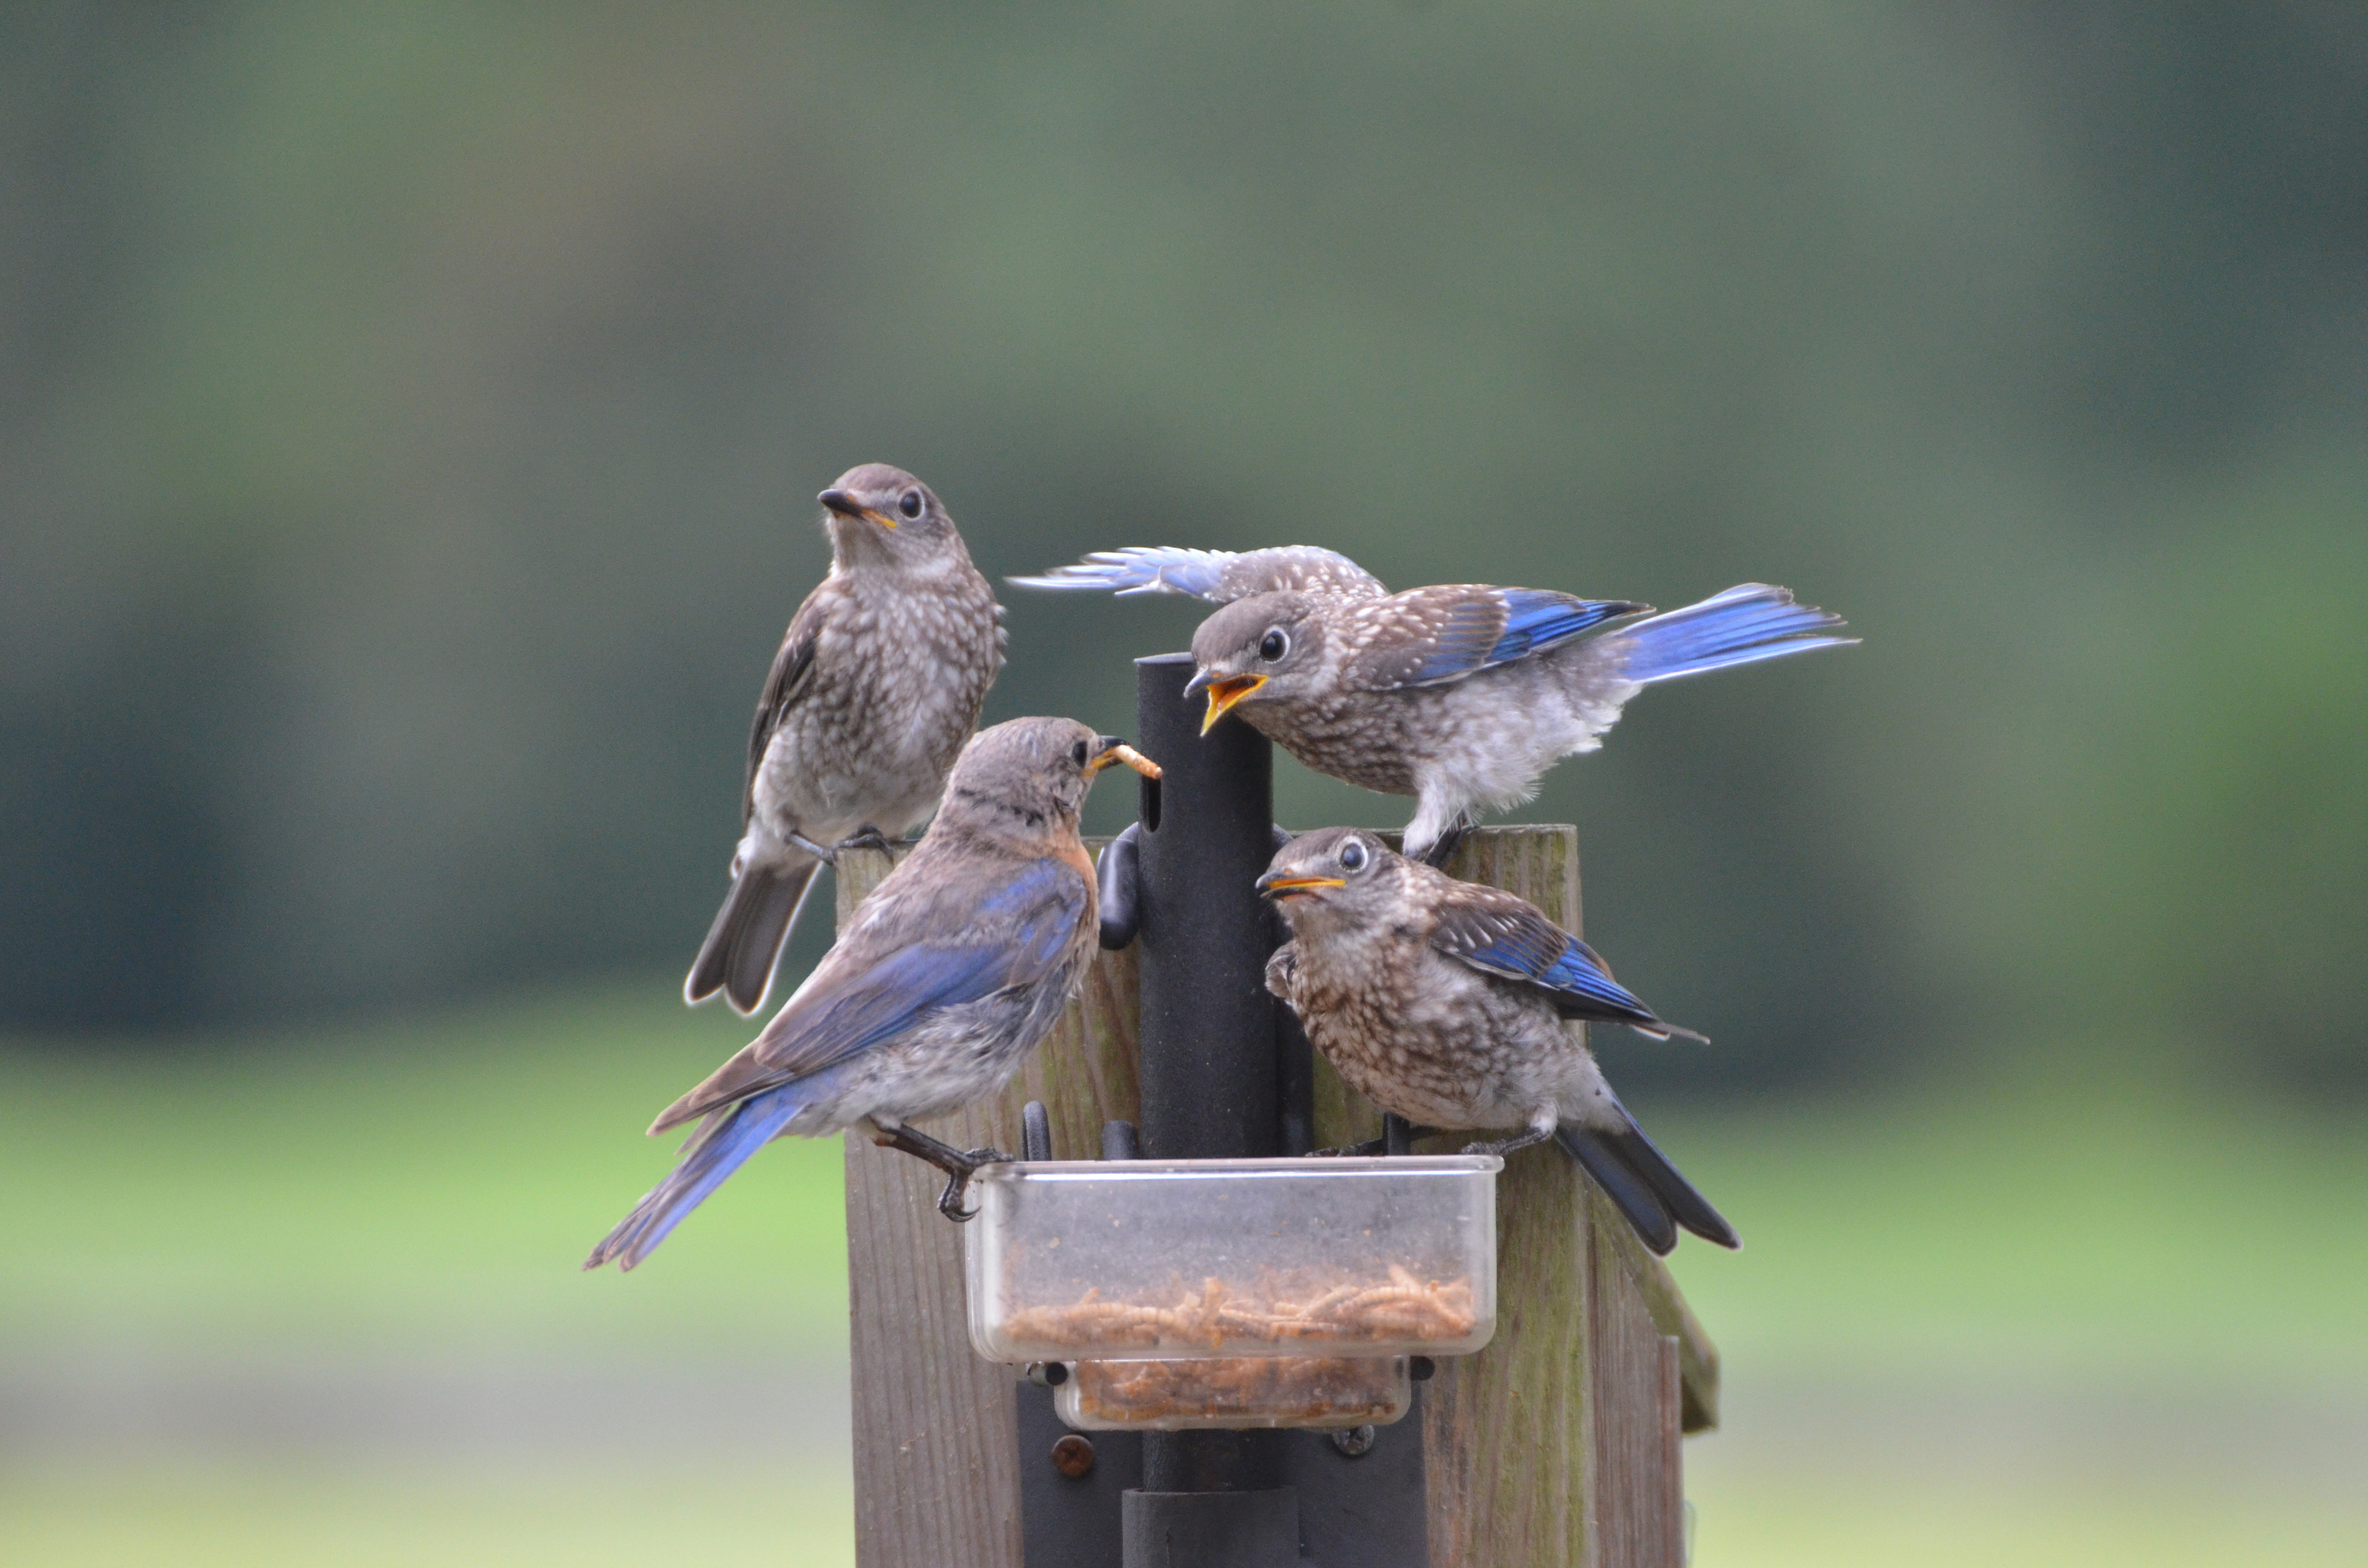 POam Monahan submitted the winning photo of an Eastern Bluebird family enjoying her mealworm feeder.